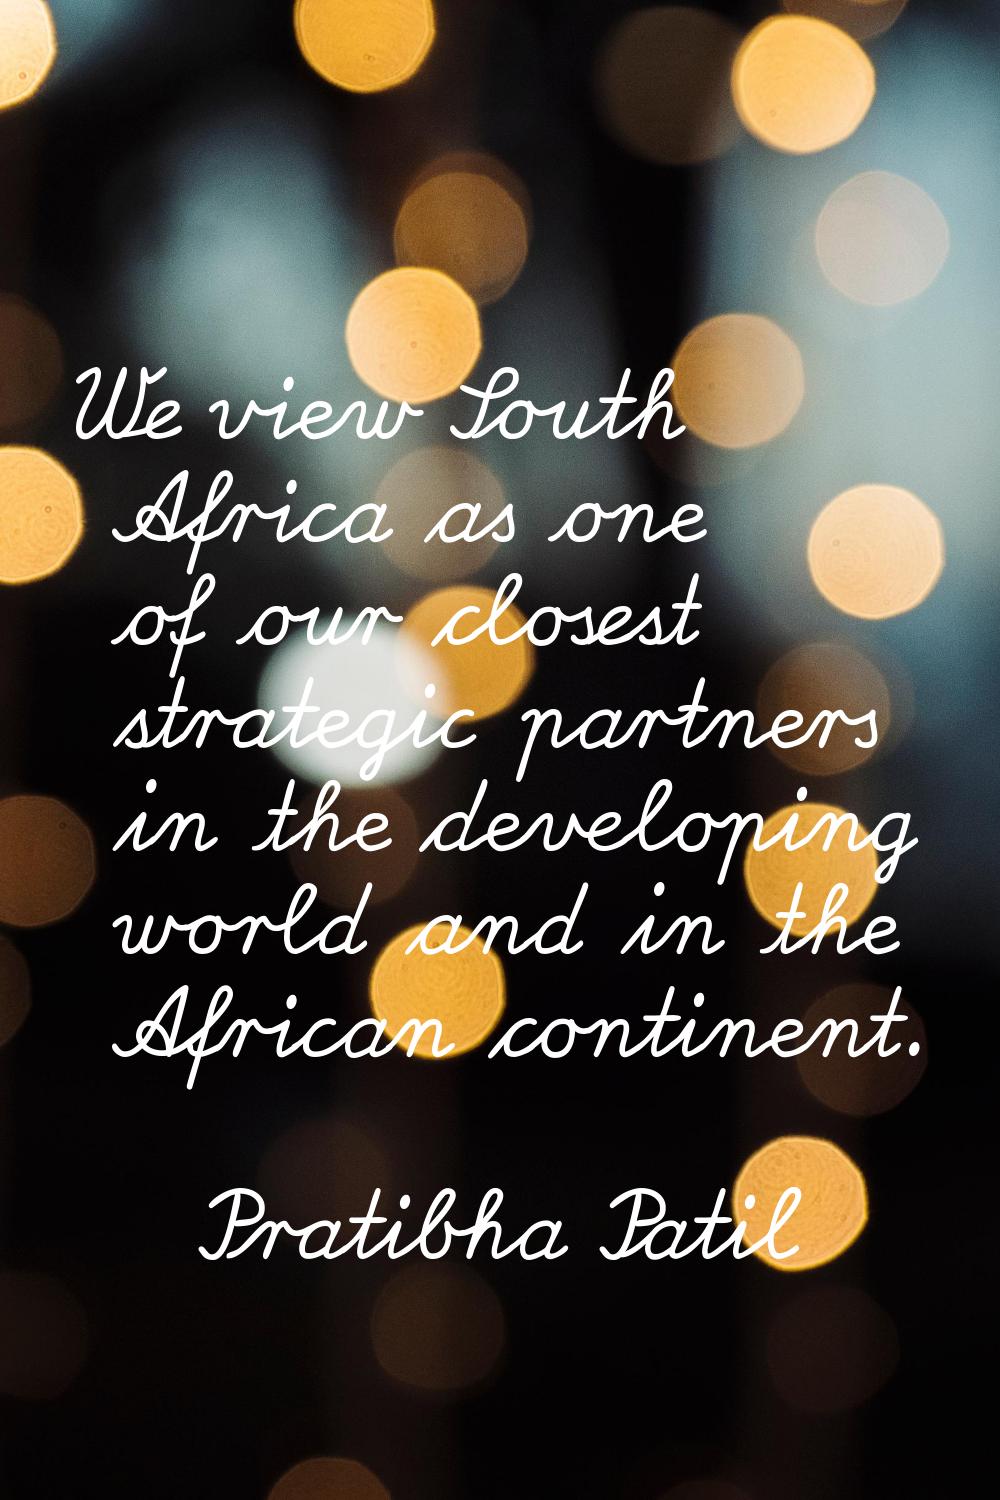 We view South Africa as one of our closest strategic partners in the developing world and in the Af